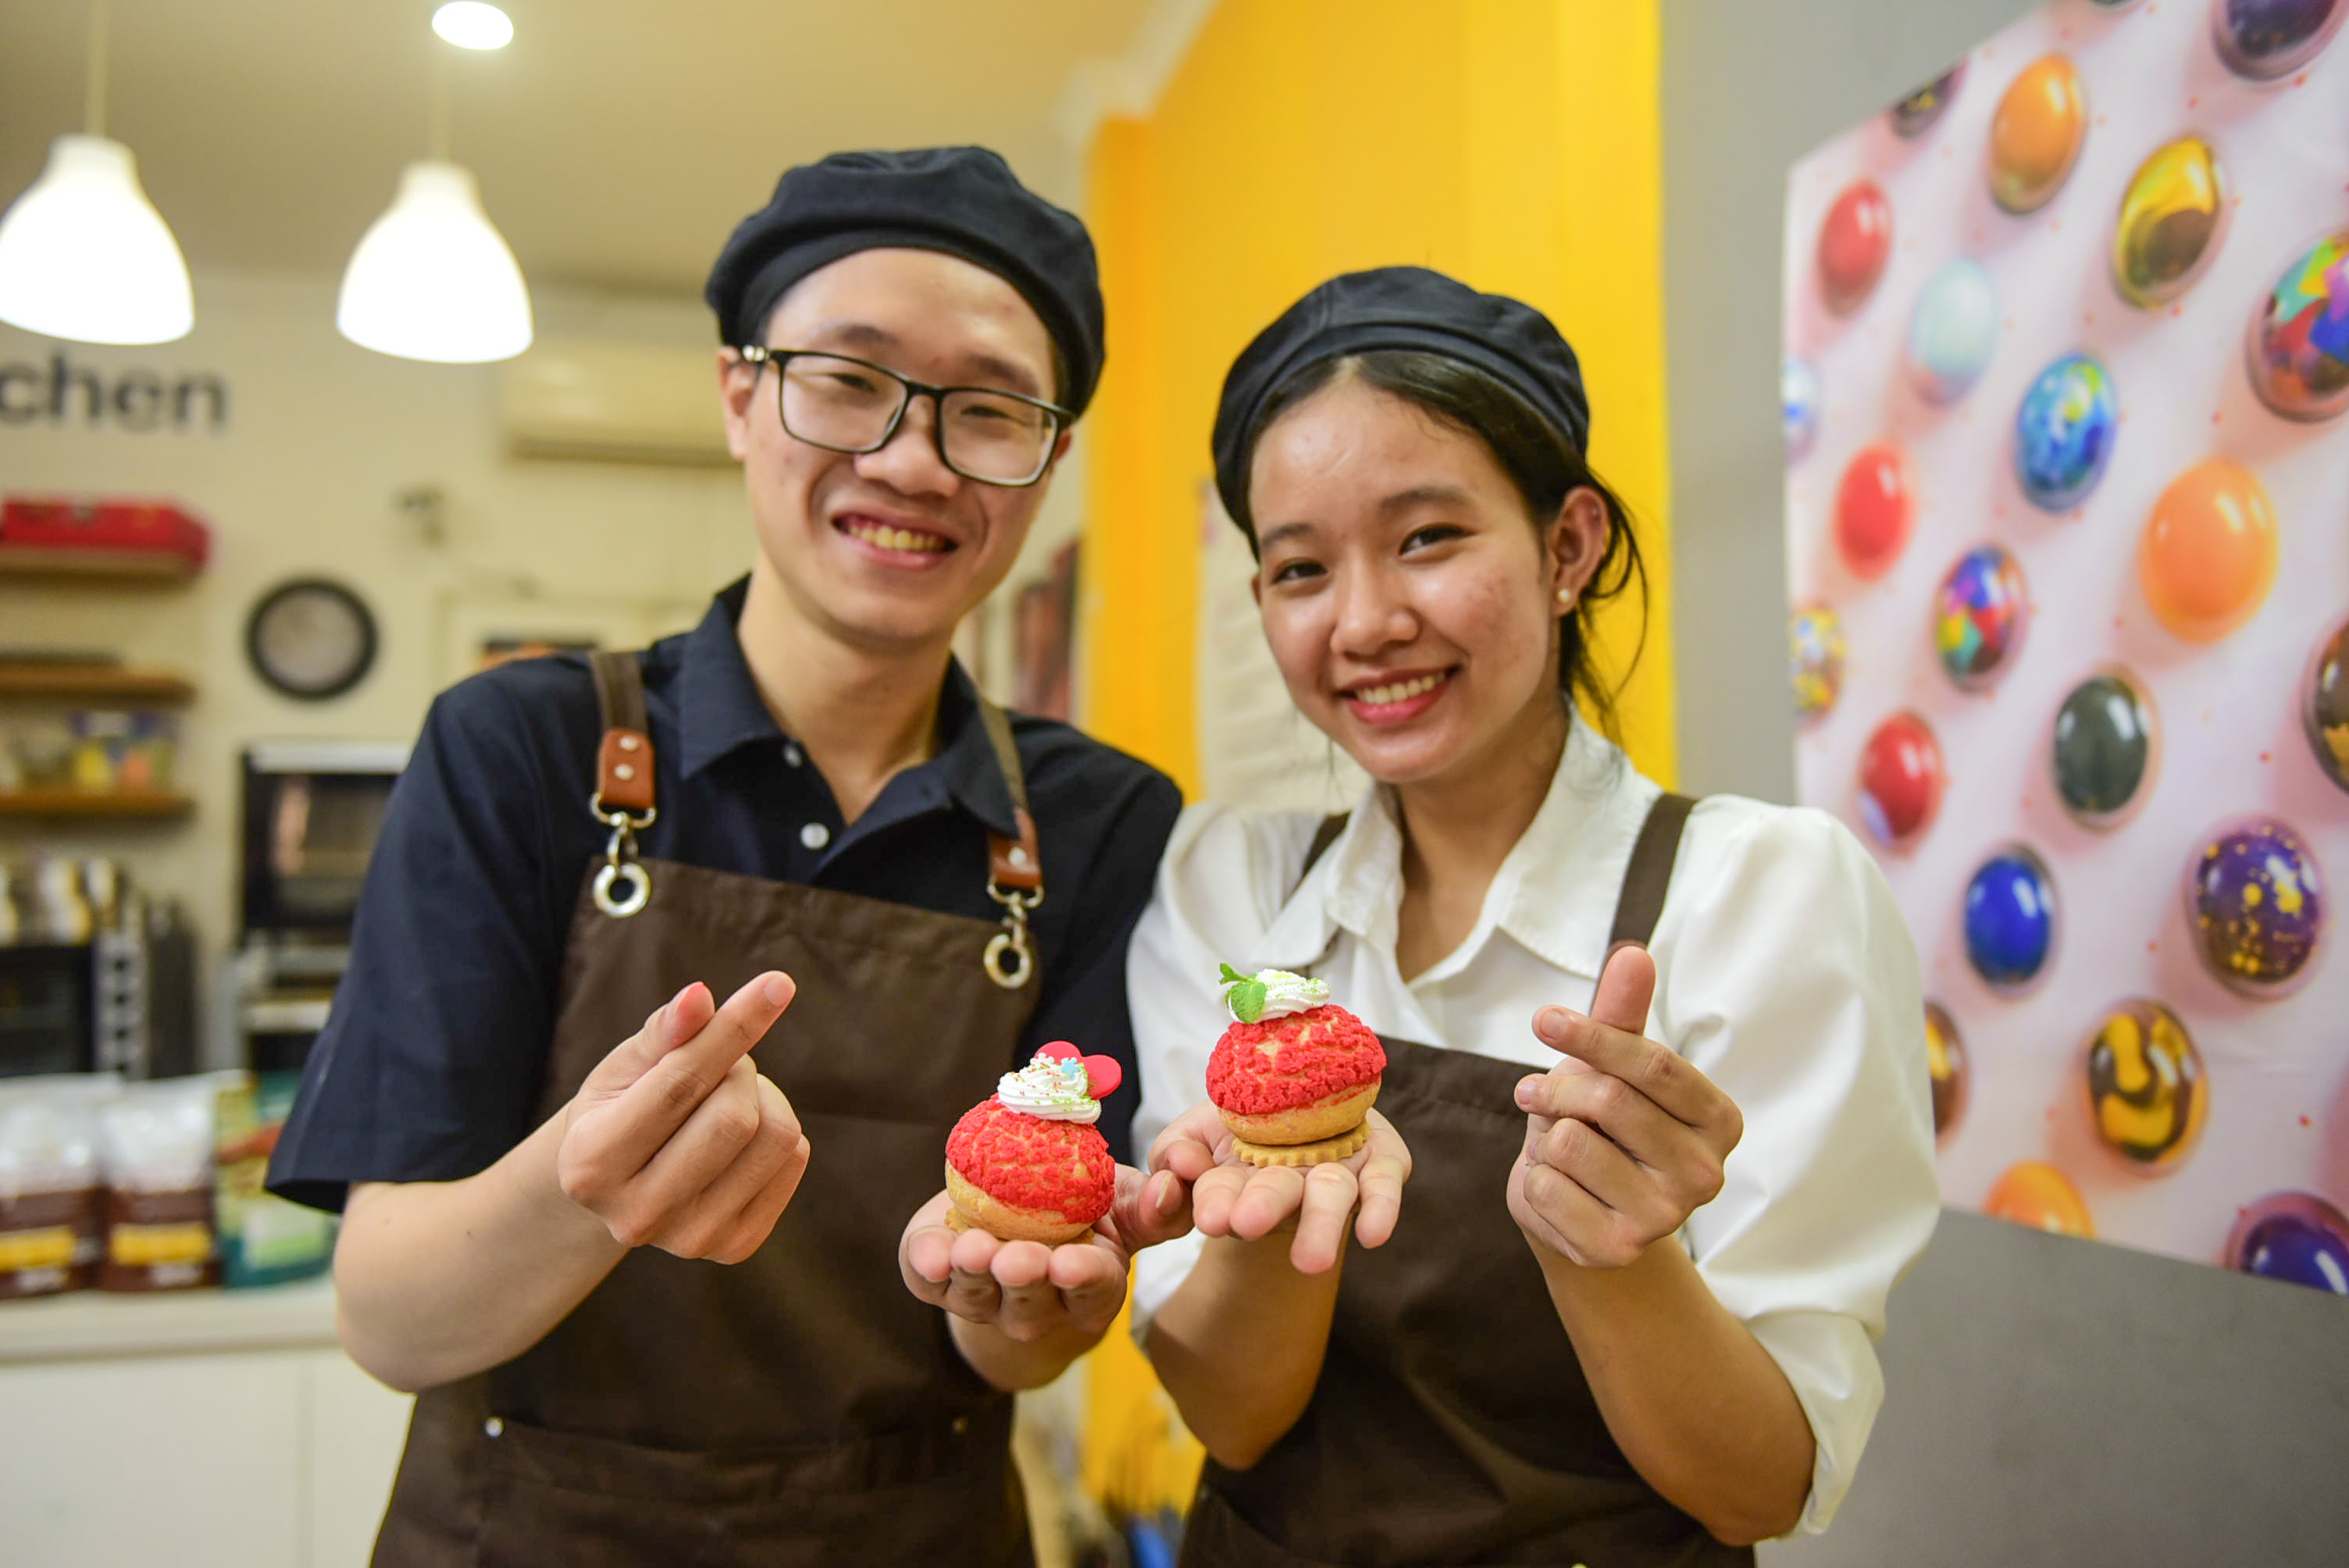 Vietnamese couples celebrate Valentine's Day with baking workshop